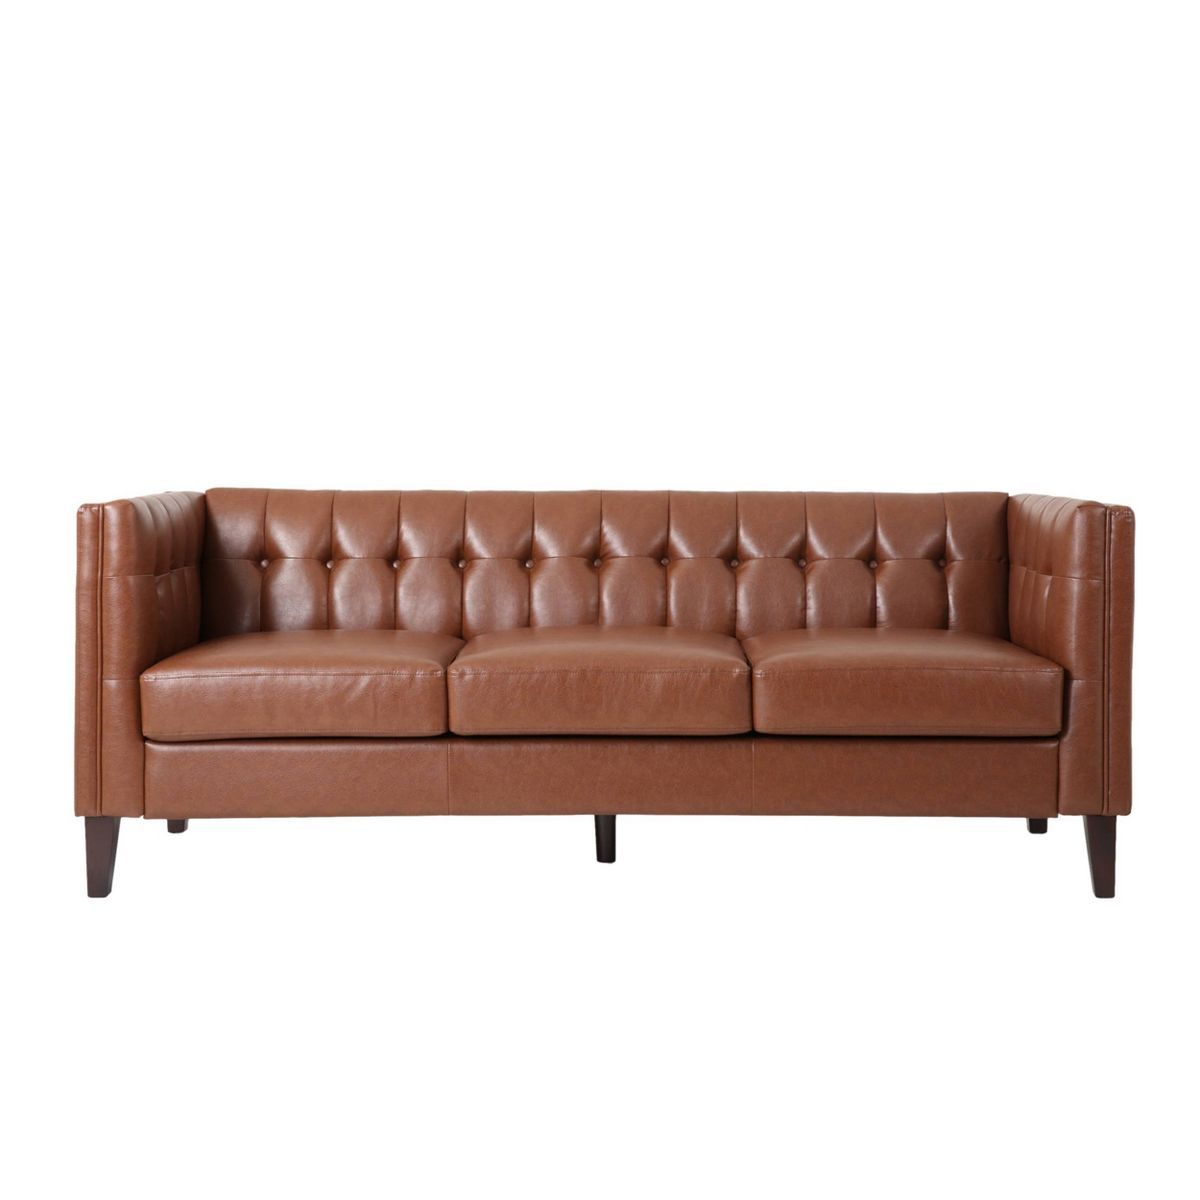 Pondway Contemporary Faux Leather Tufted 3 Seater Sofa - Christopher Knight Home | Target